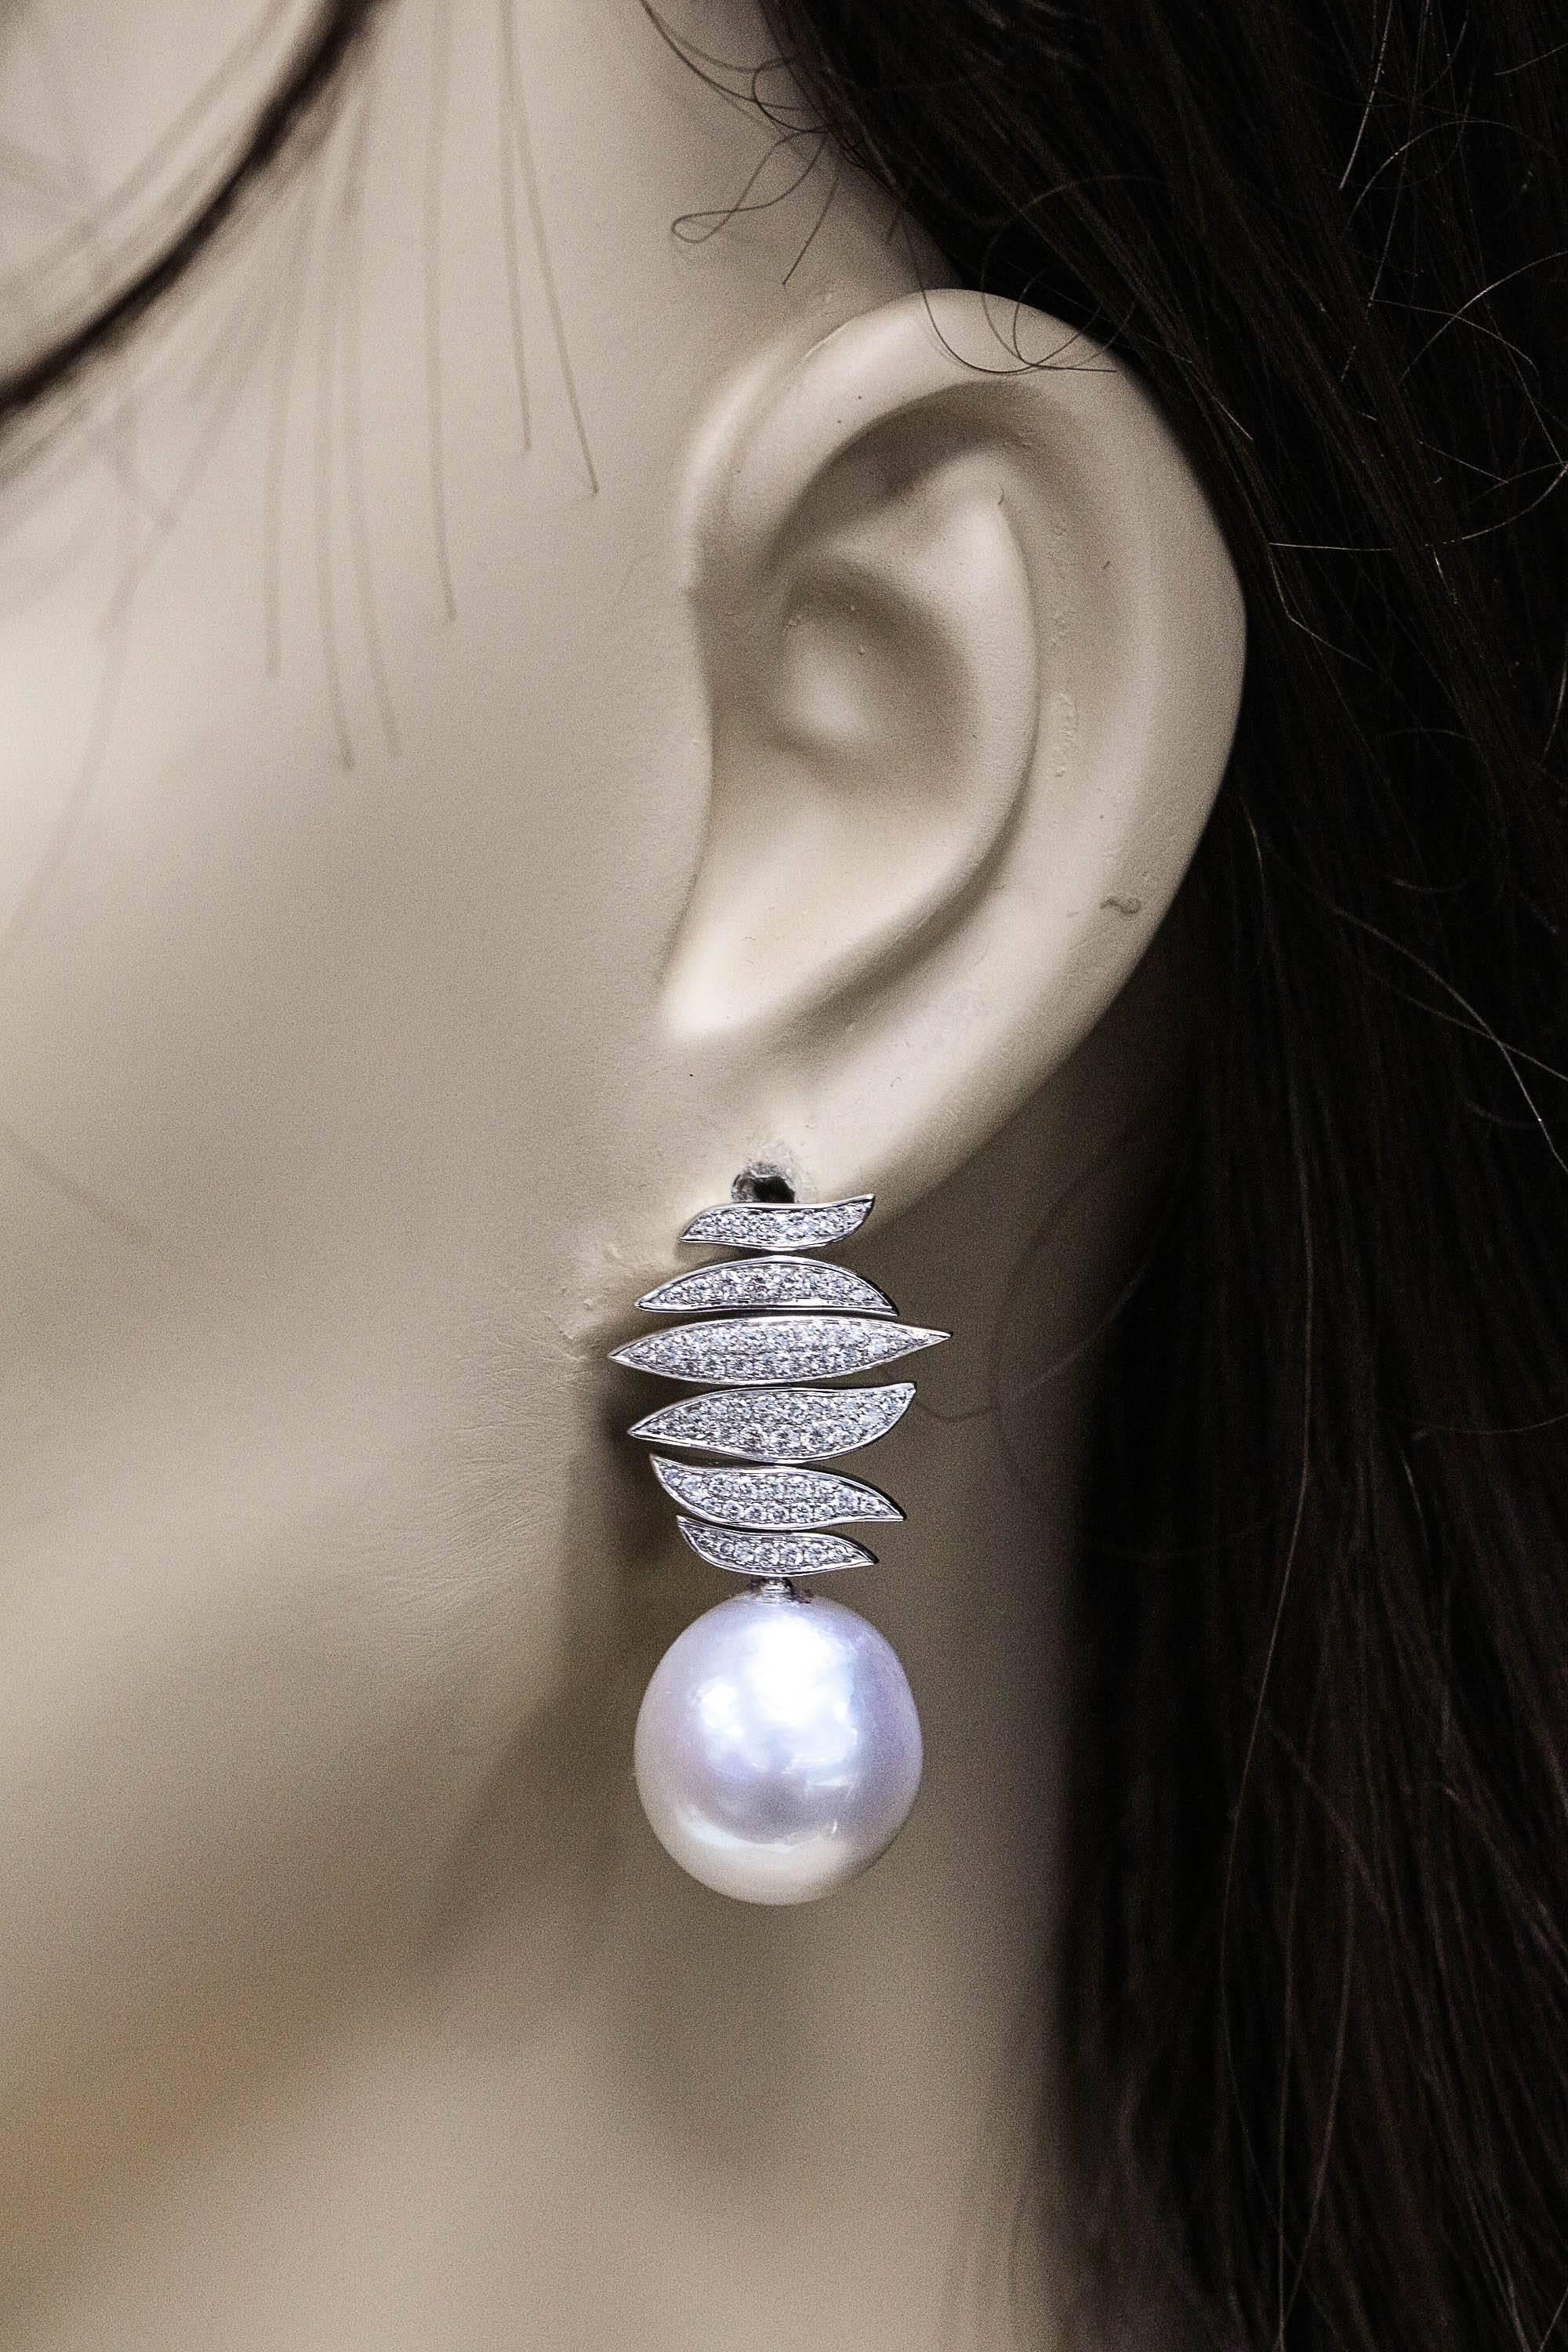 18K White gold earring featuring two South Sea Baroque Pearls measuring 14-15 mm with a diamond petal design weighing 0.96 carats. Color H Clarity SI 